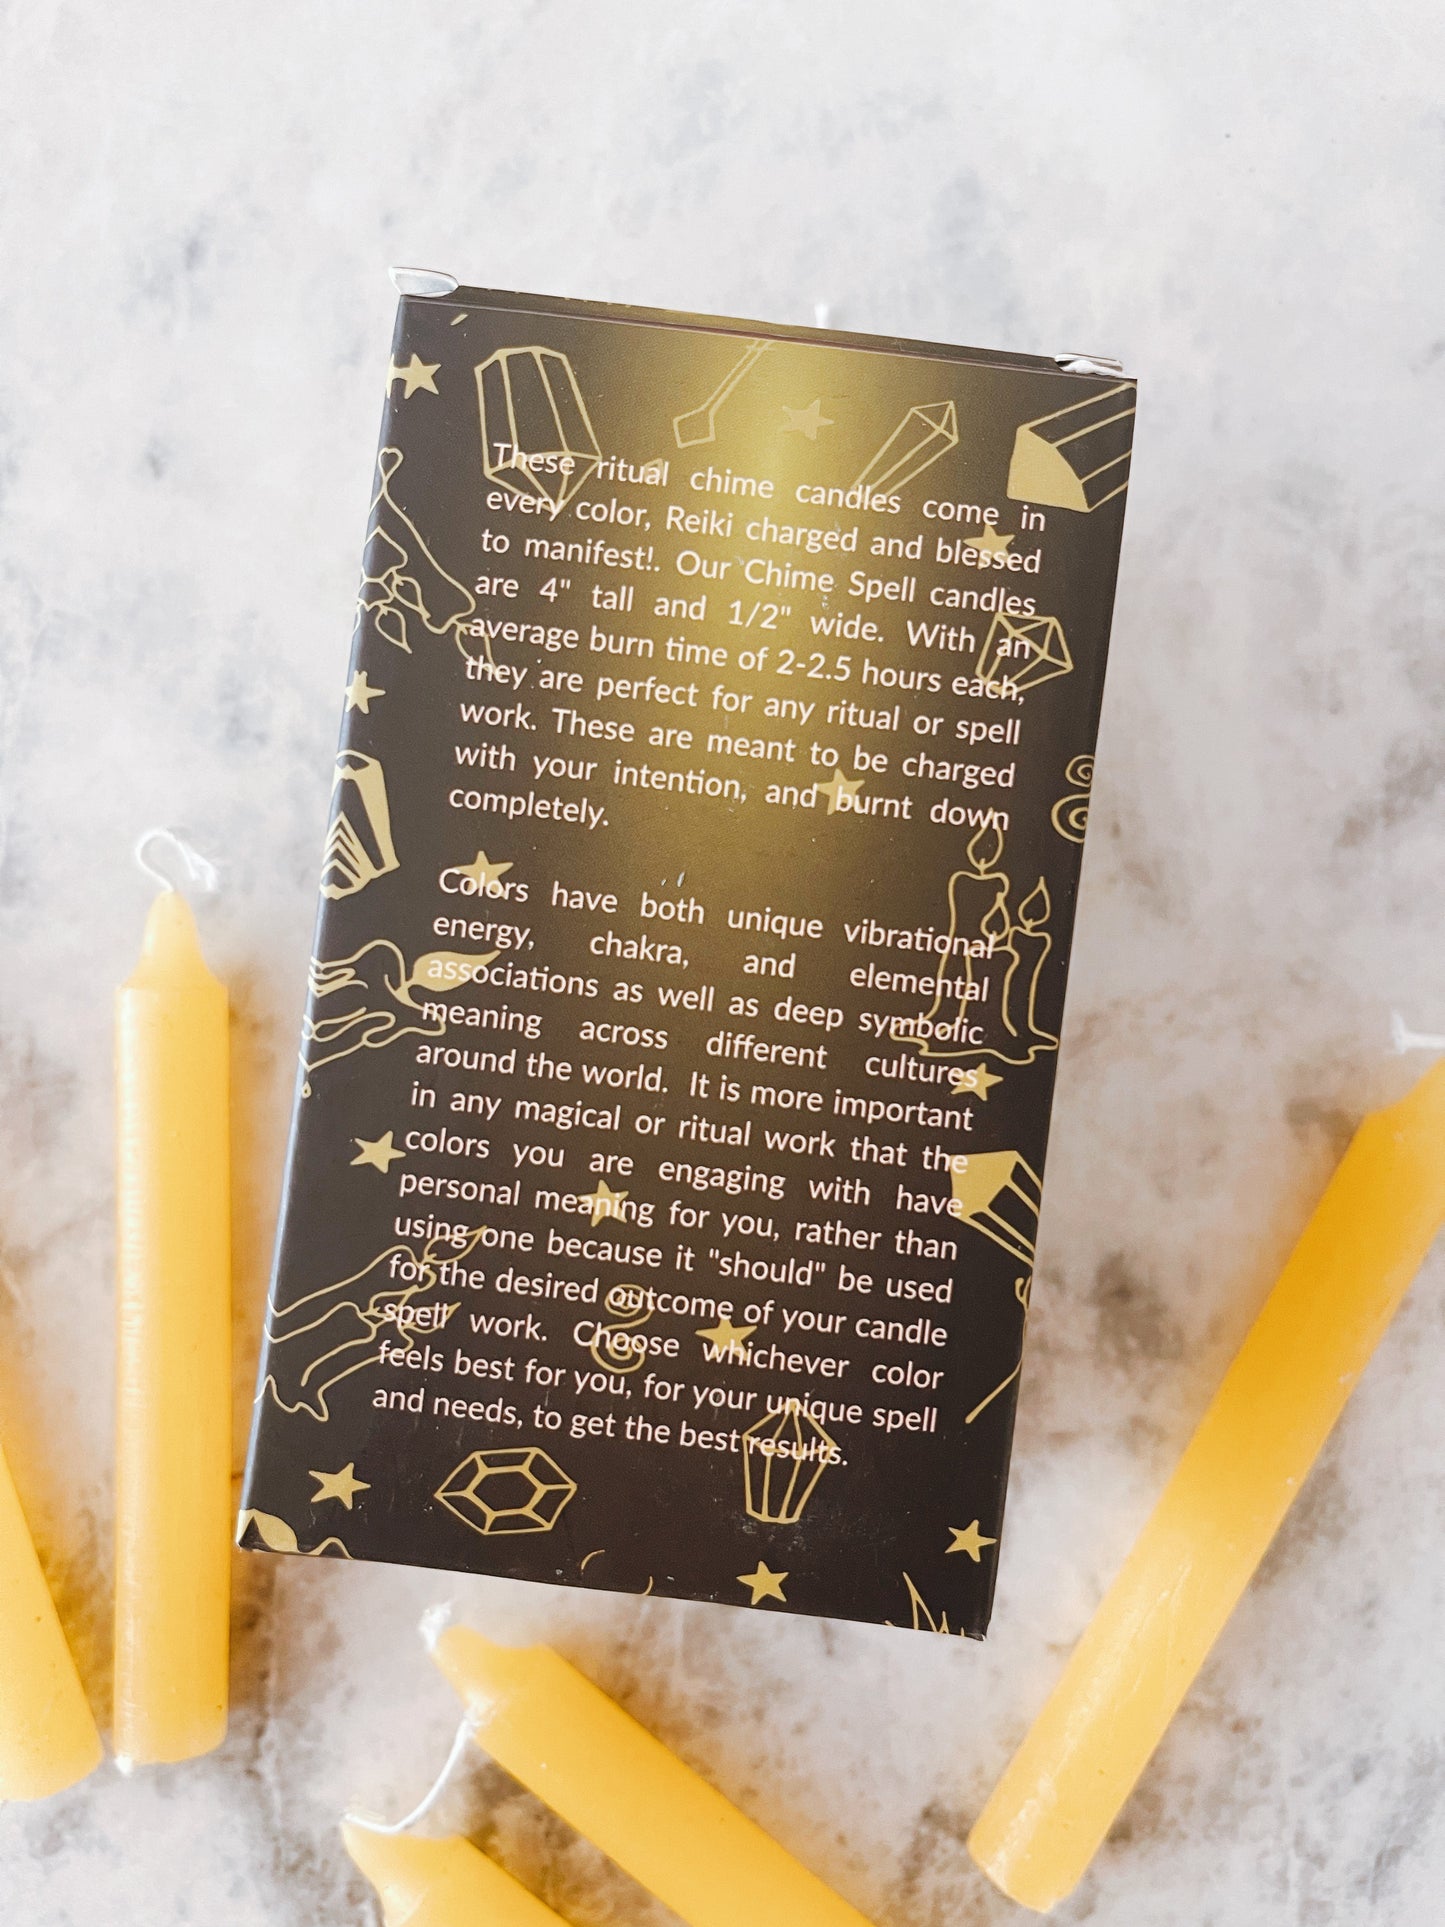 Magic Spell Candles - Friendship & Purity